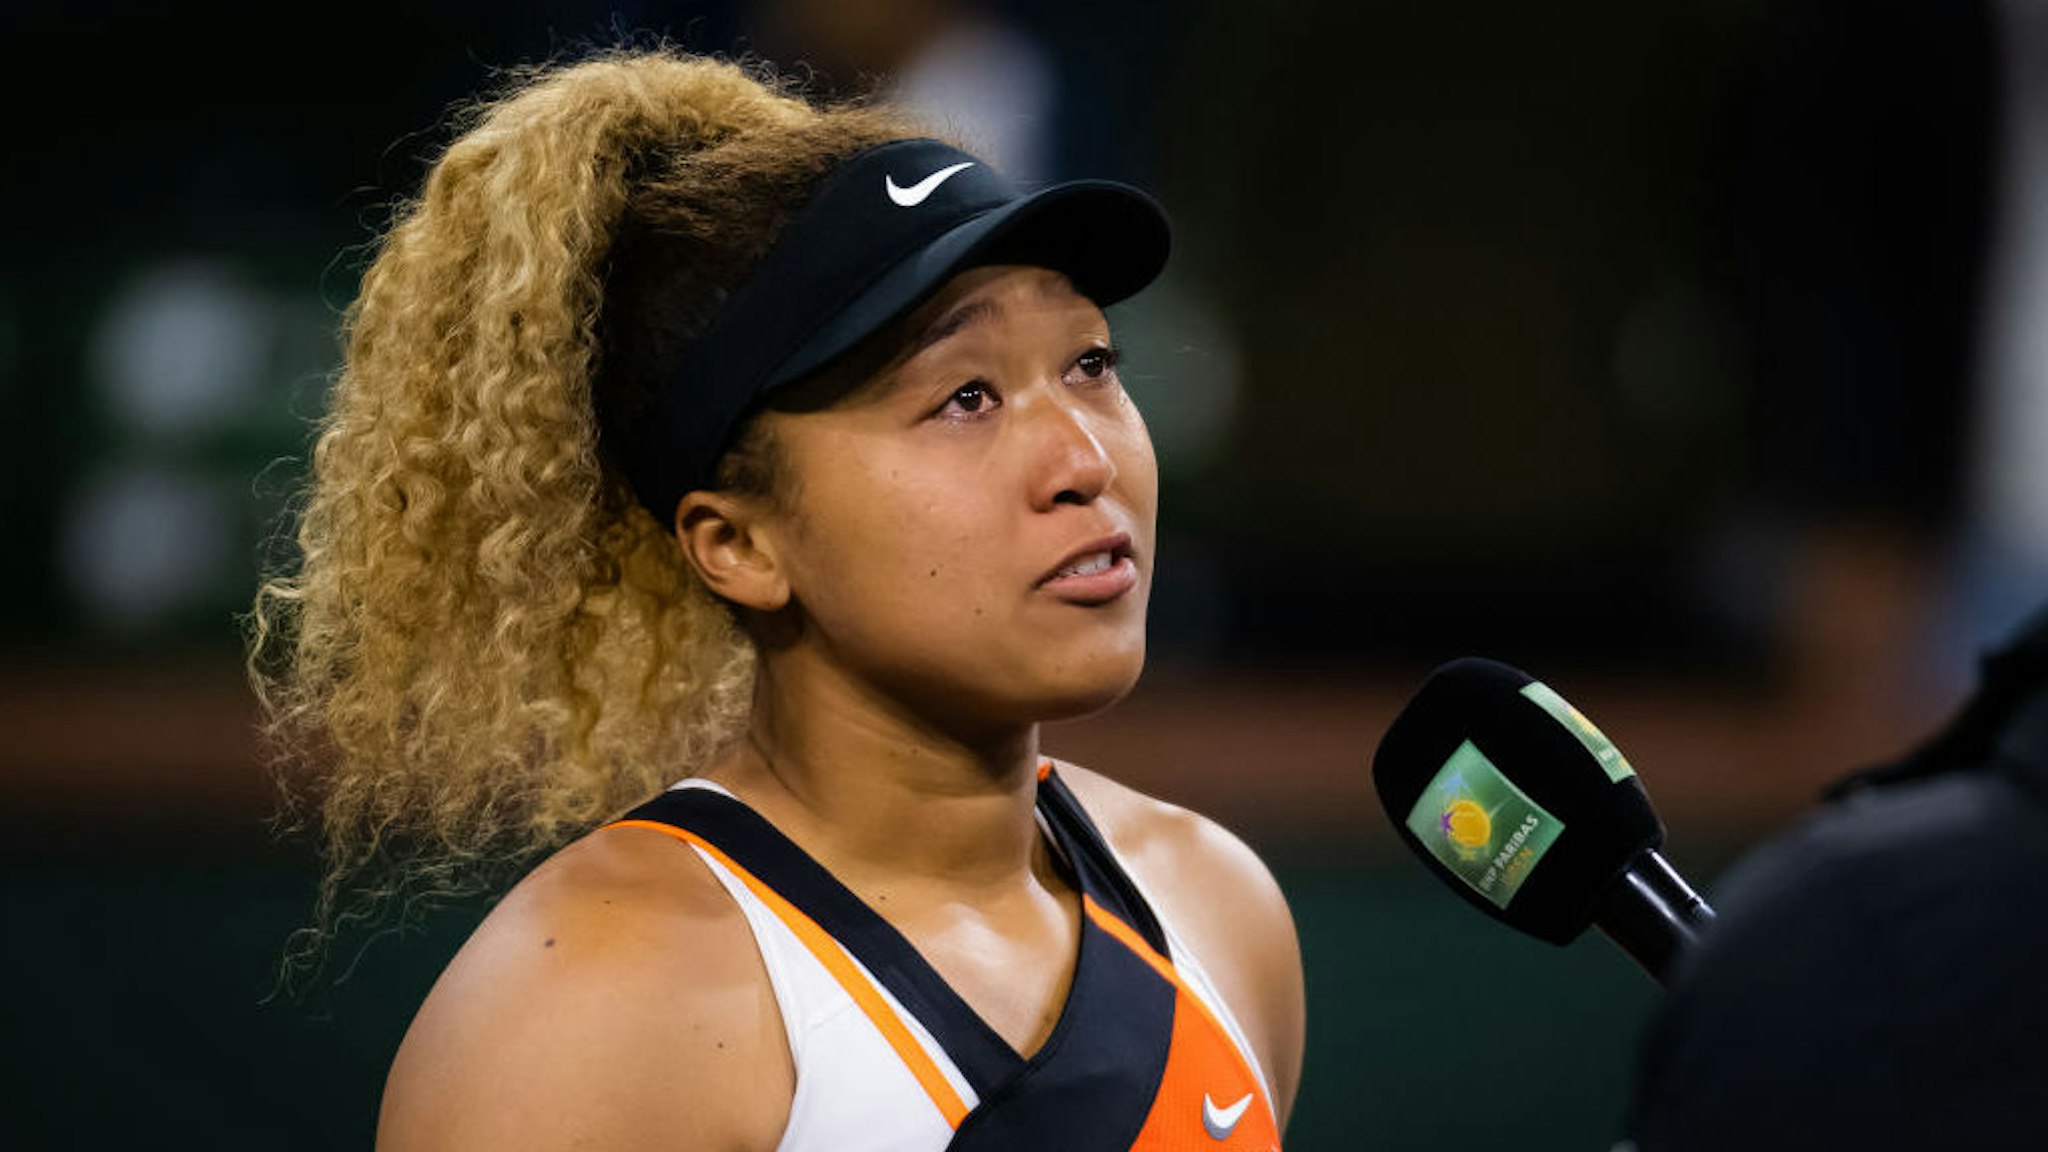 INDIAN WELLS, CALIFORNIA - MARCH 12: Naomi Osaka of Japan addresses the crowd after being heckled in her second-round match against Veronika Kudermetova of Russia at the 2022 BNP Paribas Open at the Indian Wells Tennis Garden on March 12, 2022 in Indian Wells, California (Photo by Robert Prange/Getty Images)